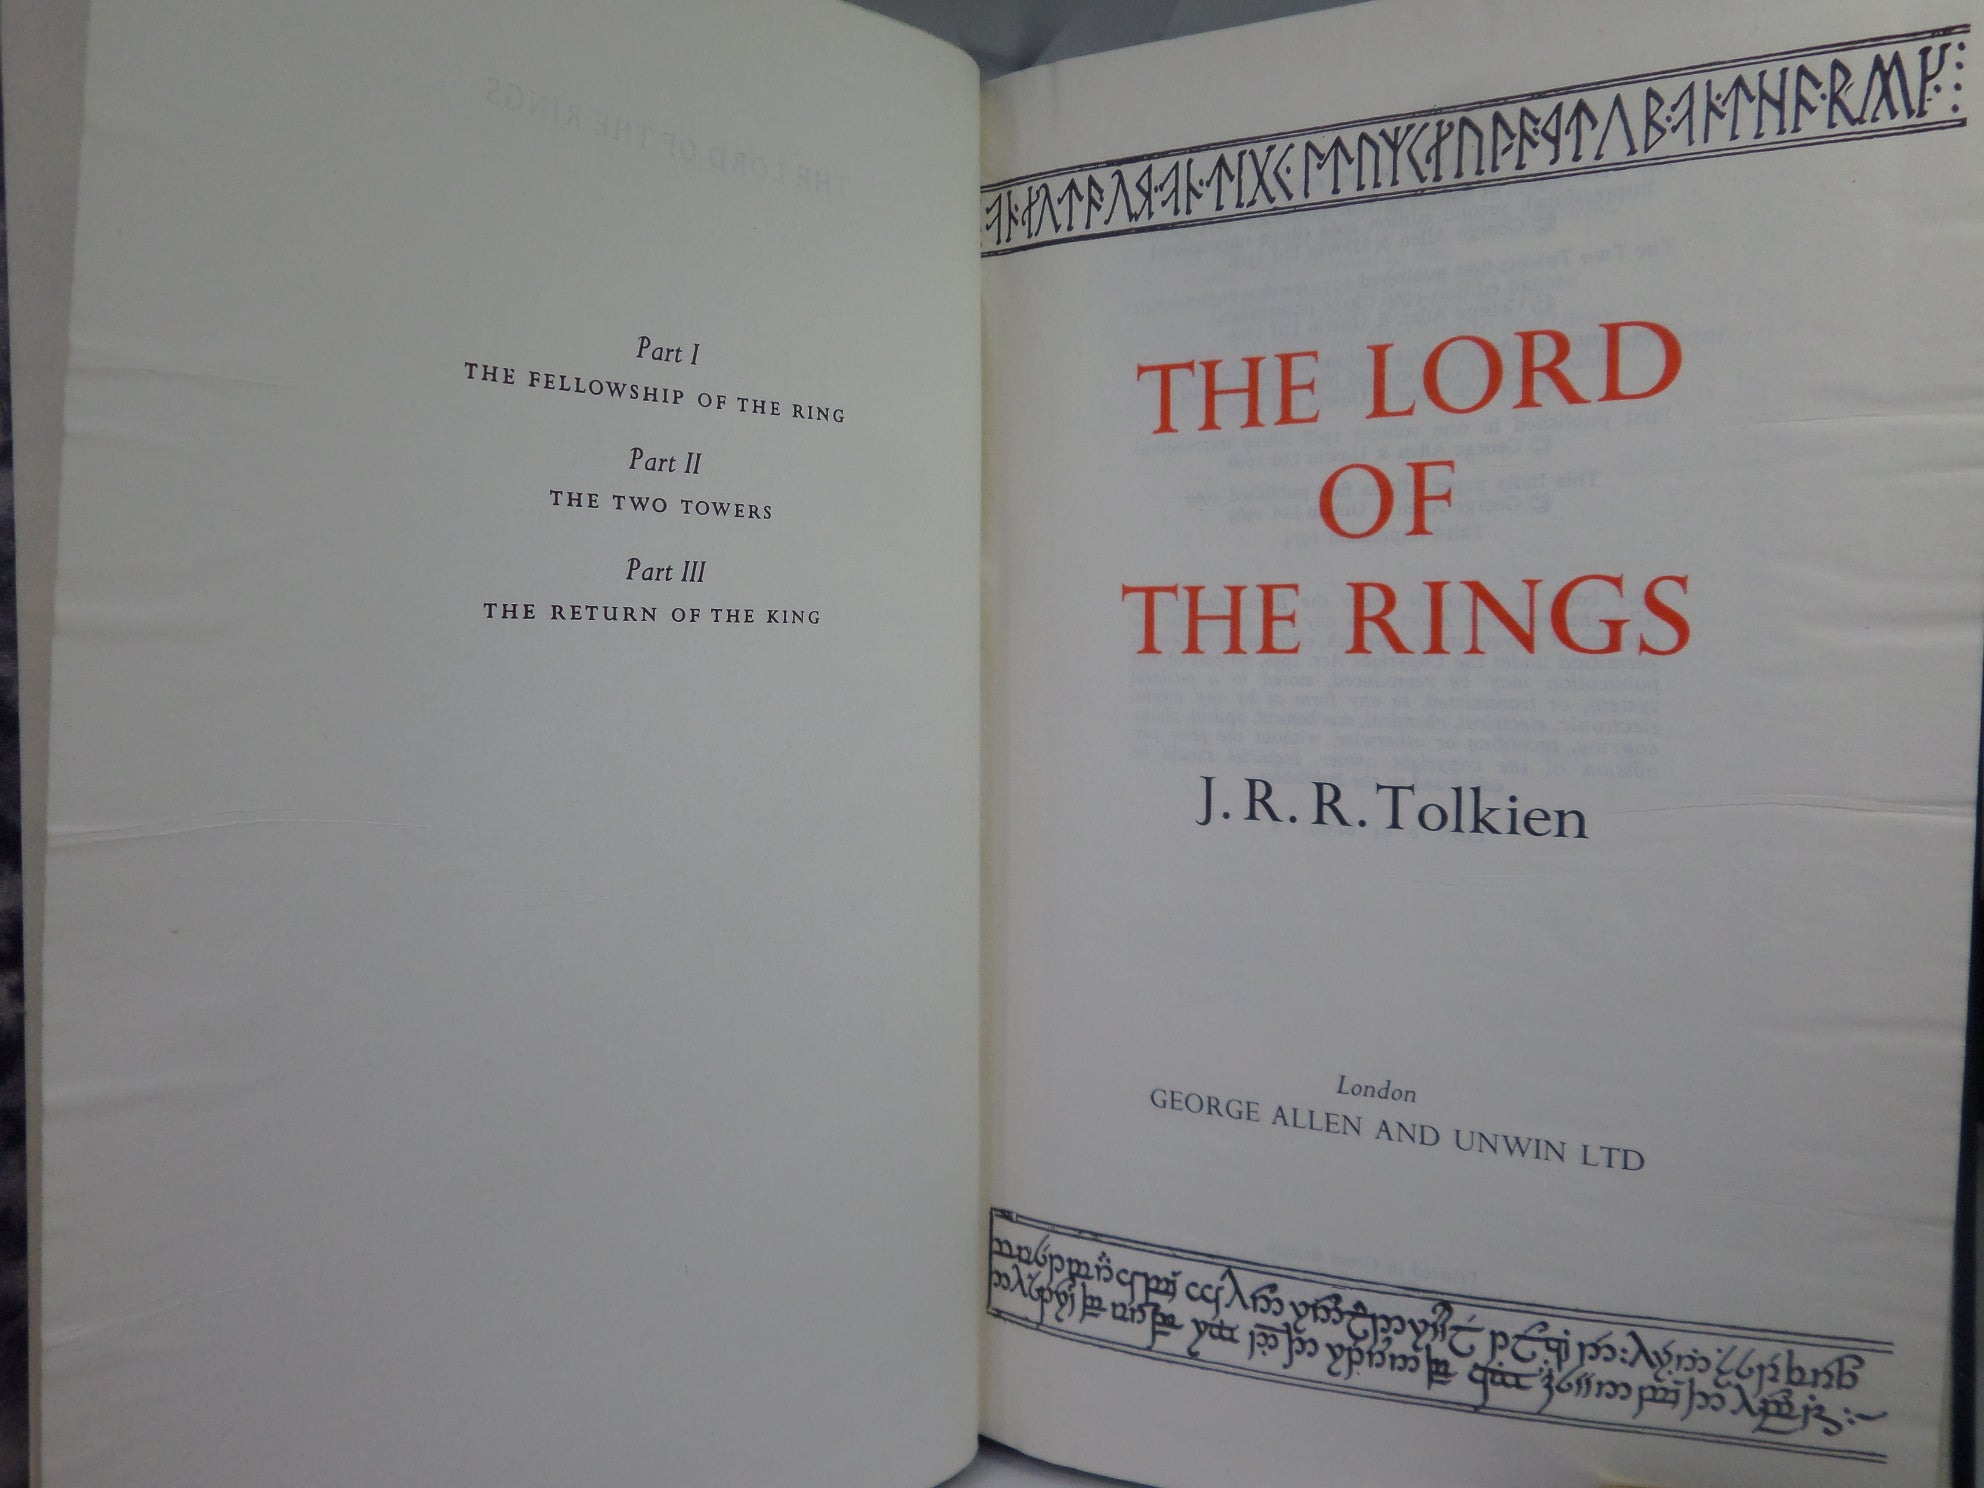 THE LORD OF THE RINGS TRILOGY BY J.R.R. TOLKIEN 1974 FINE DELUXE EDITION